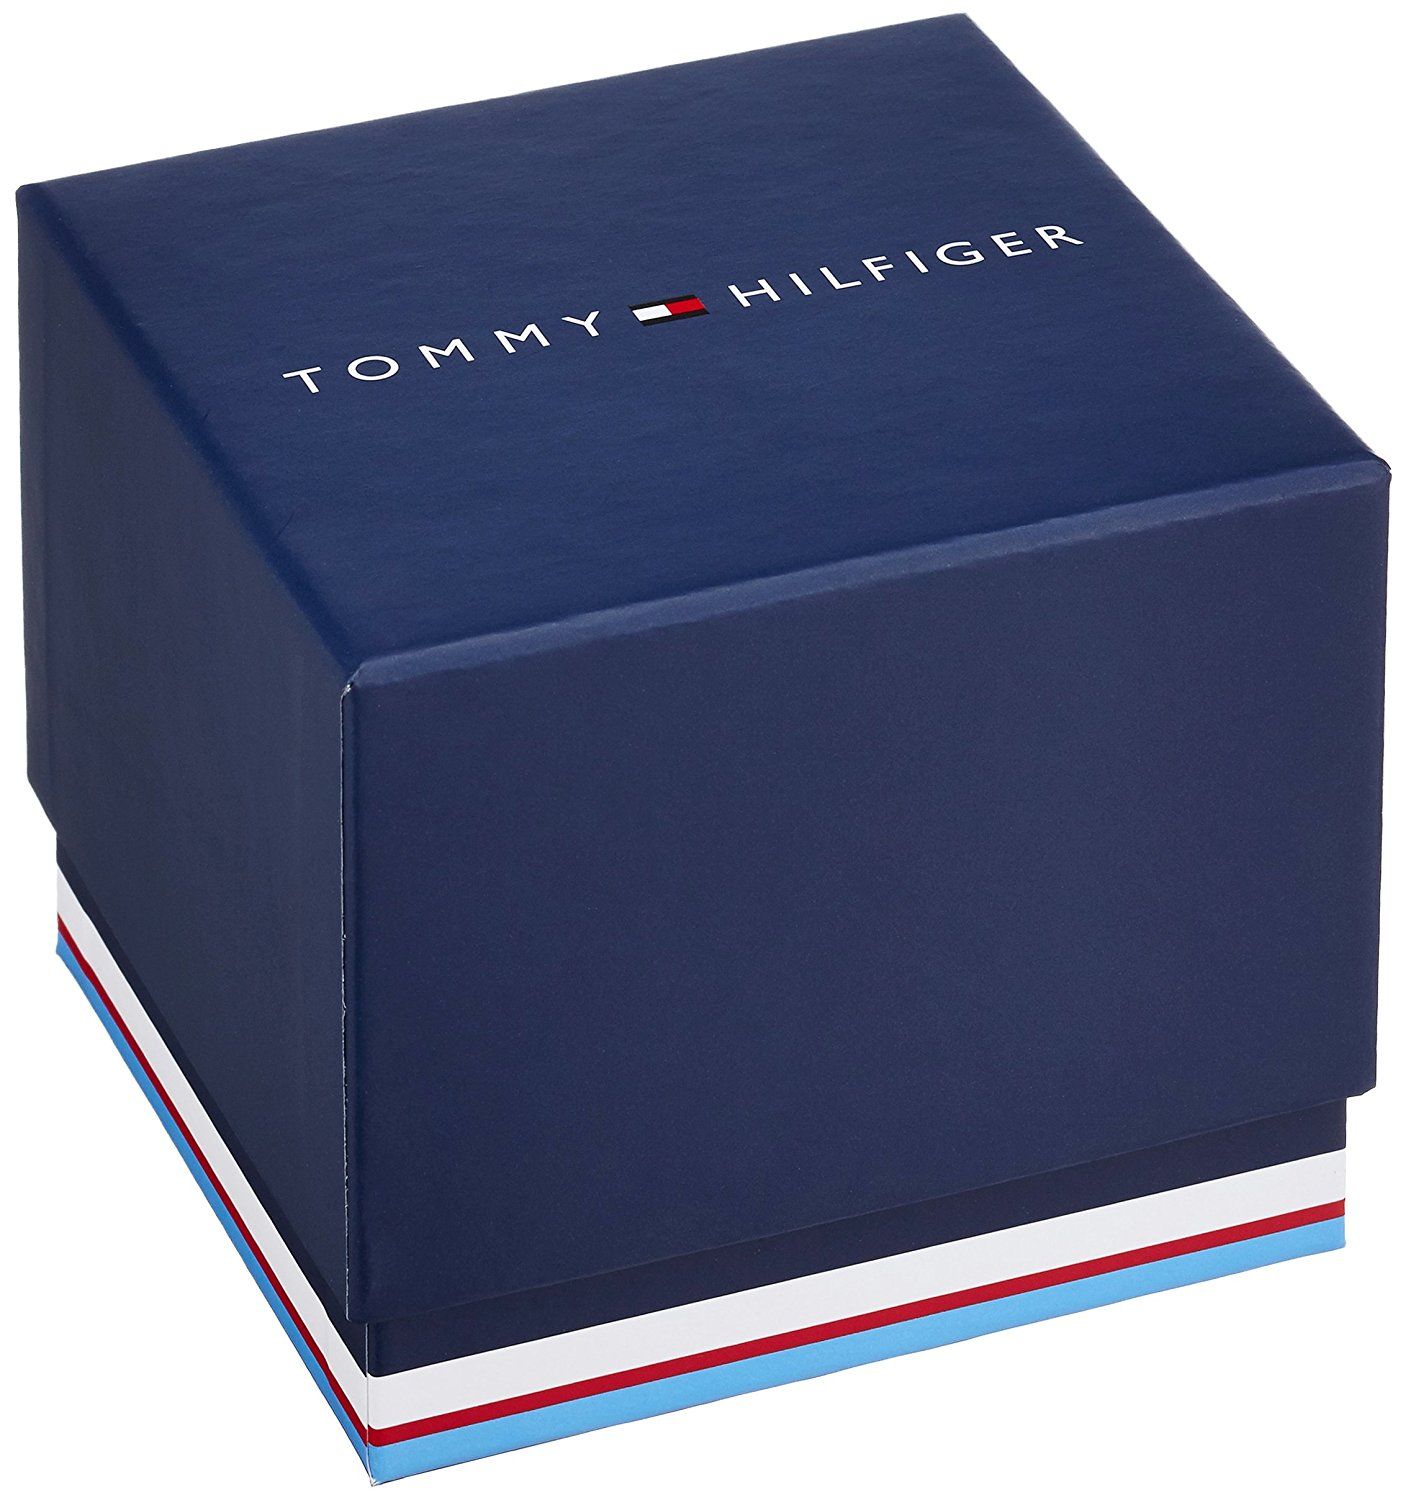 This Tommy Hilfiger Asher Multi Dial Watch for Men is the perfect timepiece to wear or to gift. It's Blue 44 mm Round case combined with the comfortable Blue Stainless steel watch band will ensure you enjoy this stunning timepiece without any compromise. Operated by a high quality Quartz movement and water resistant to 5 bars, your watch will keep ticking. The classic colours will go great with any outfit . It enables you to easily spice up a normal outfit and add style to your life. -The watch has a calendar function: Day-Date, 24-hour Display High quality 21 cm length and 19 mm width Blue Stainless steel strap with a Fold over with push button clasp Case diameter: 44 mm,case thickness: 11 mm, case colour: Blue and dial colour: Blue